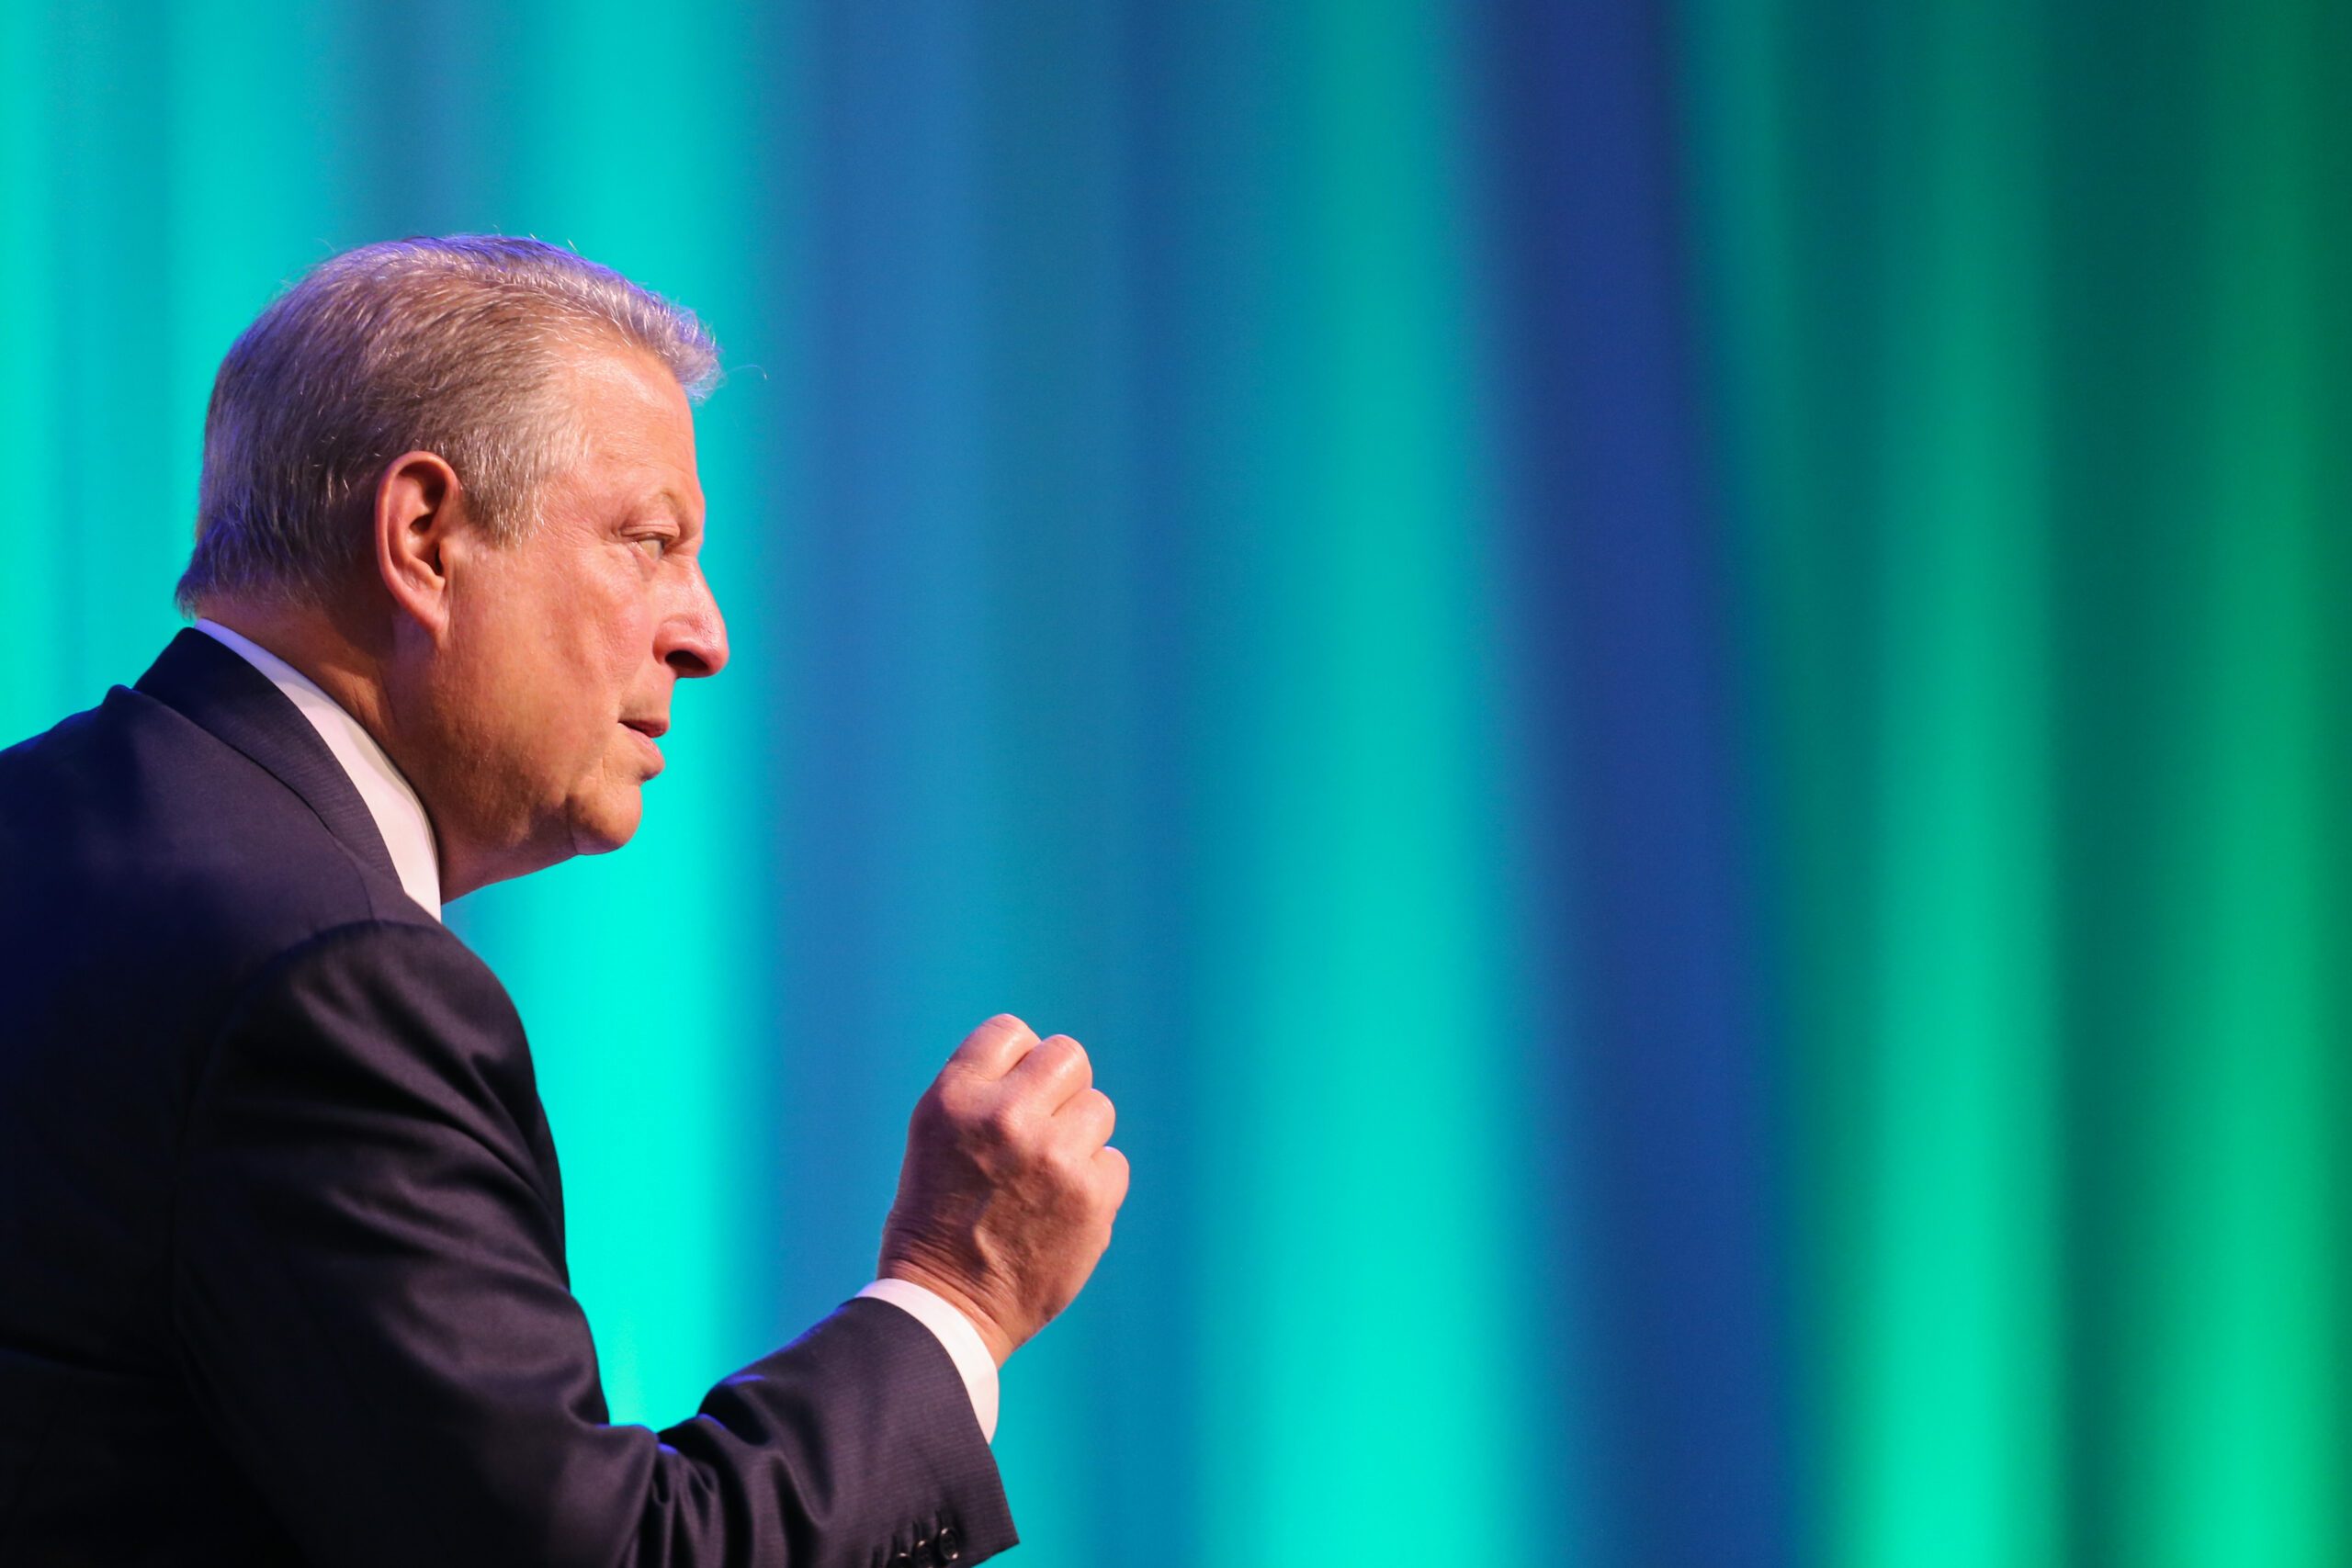 WATCH: Al Gore on coal, climate change, and Tacloban